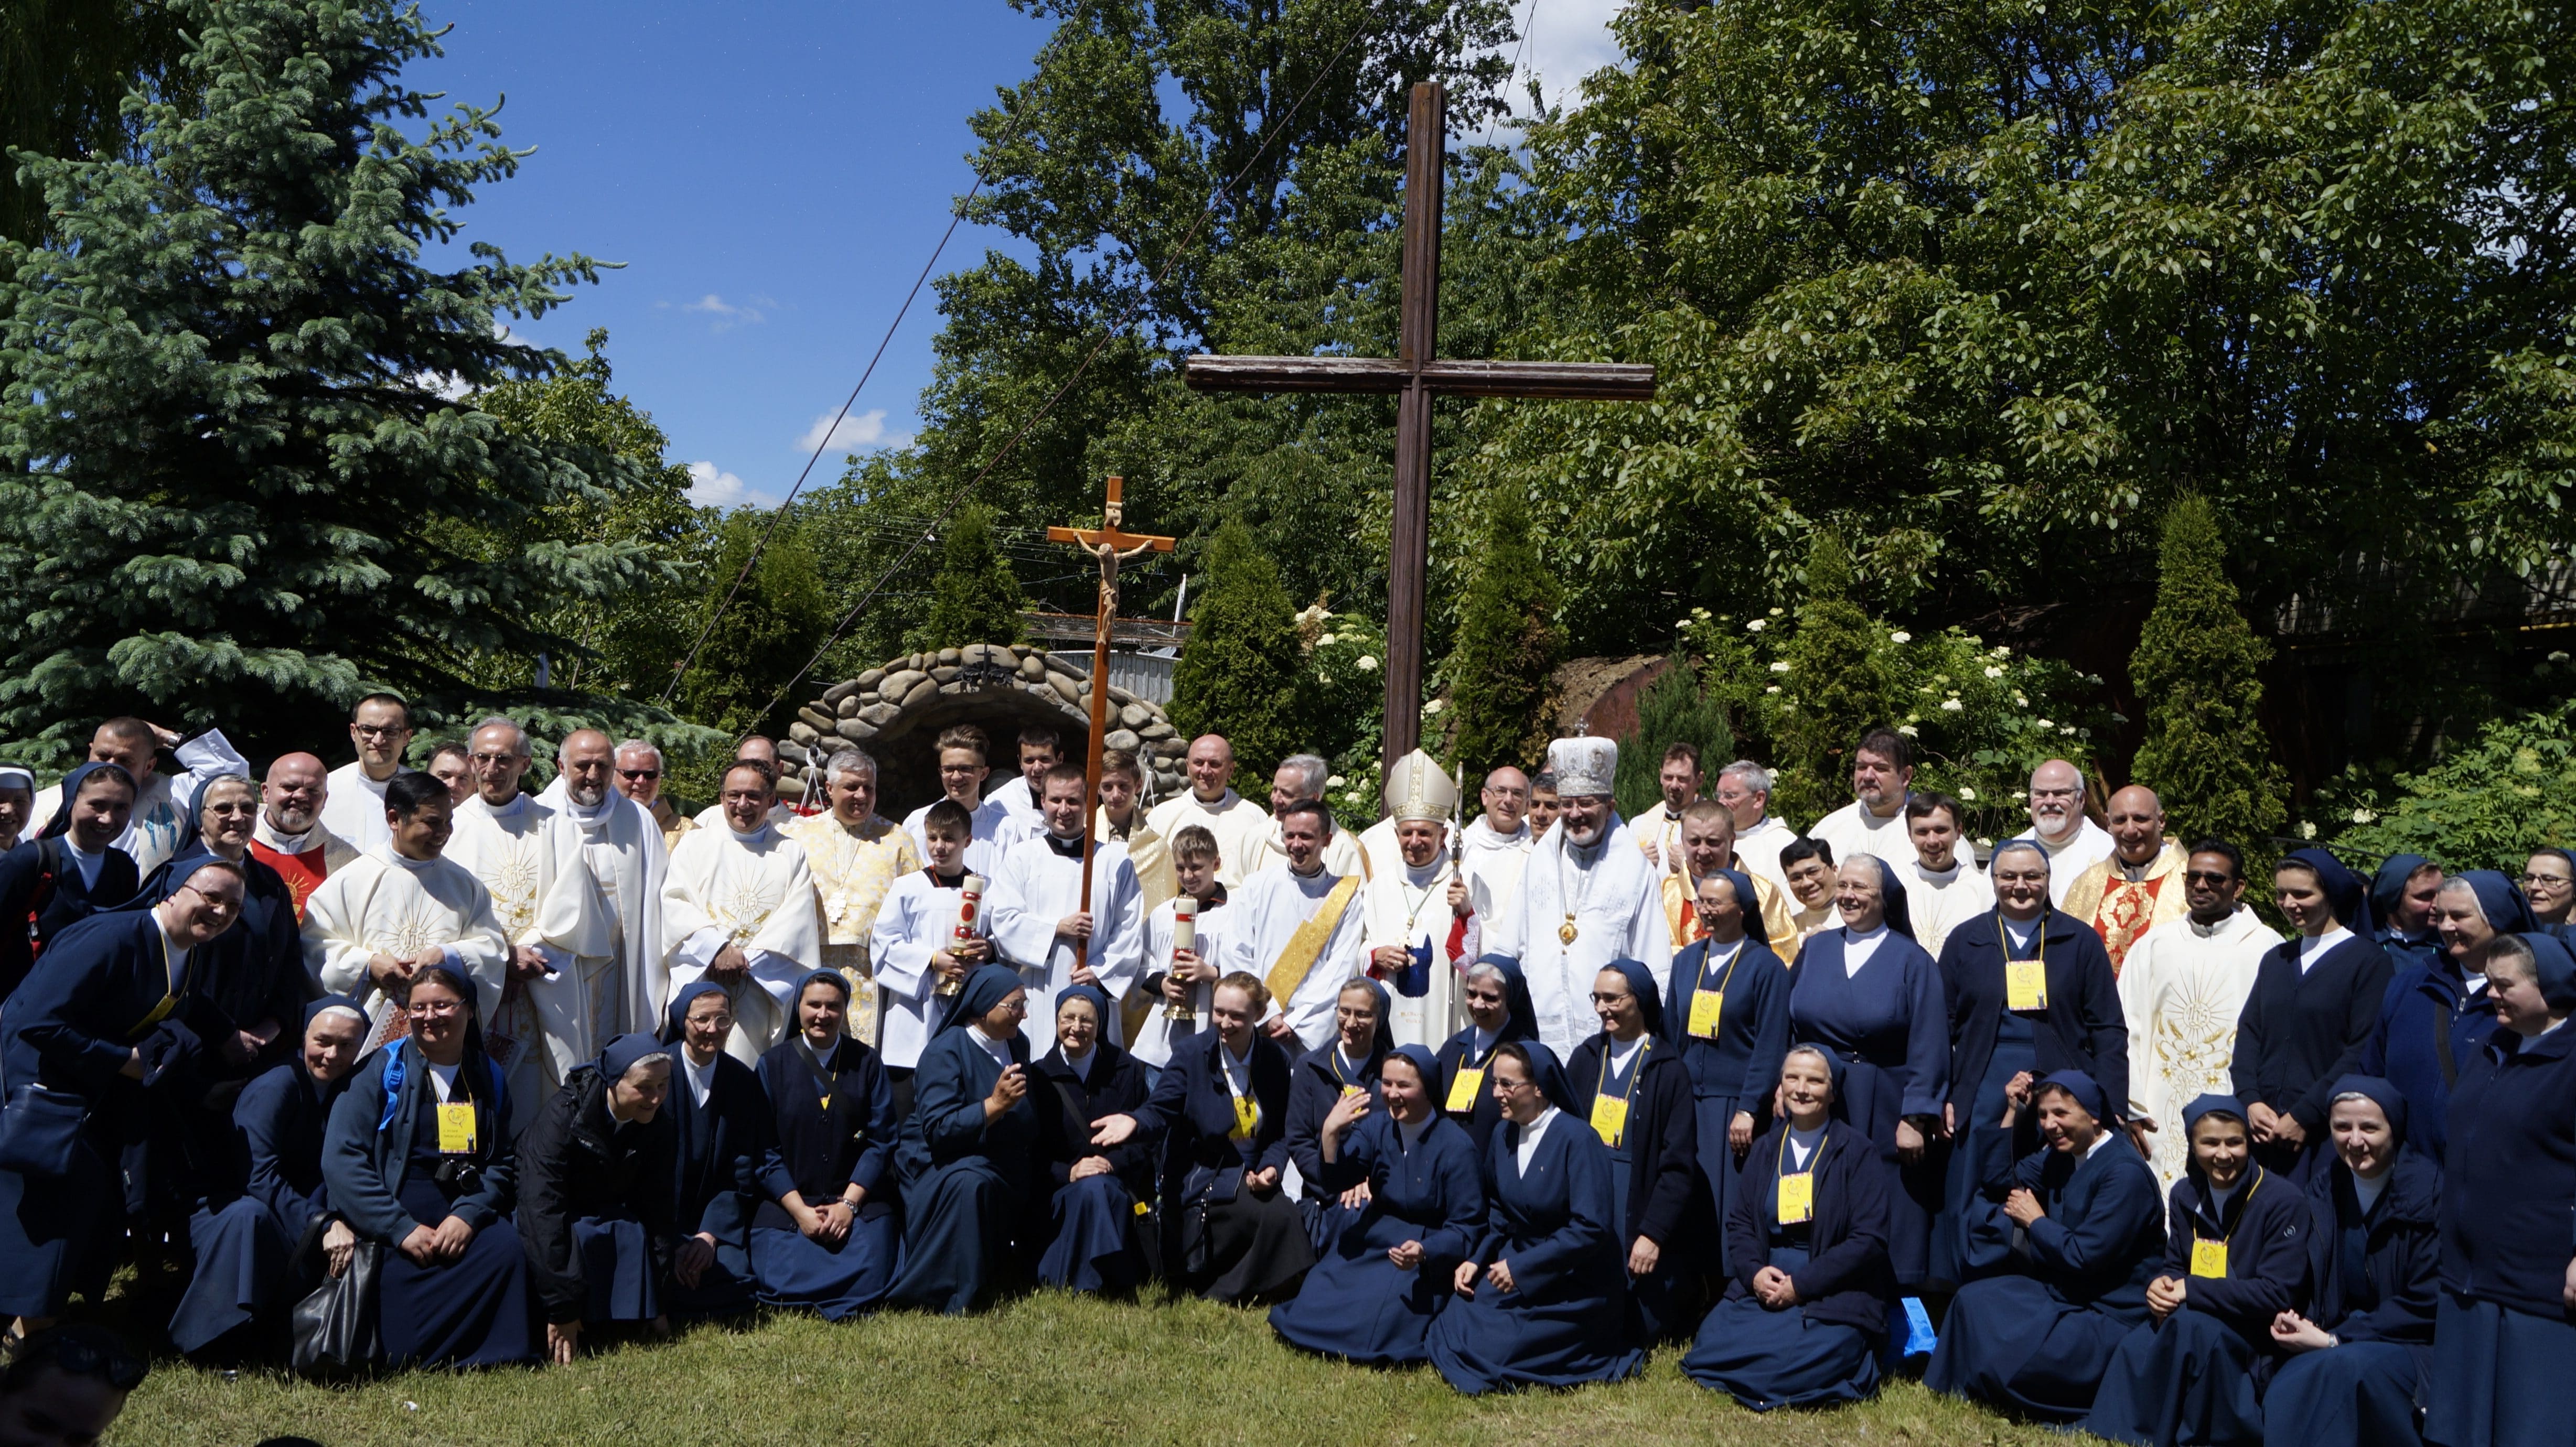 VIII Pilgrimage to the tomb of the Blessed Martha Wiecka